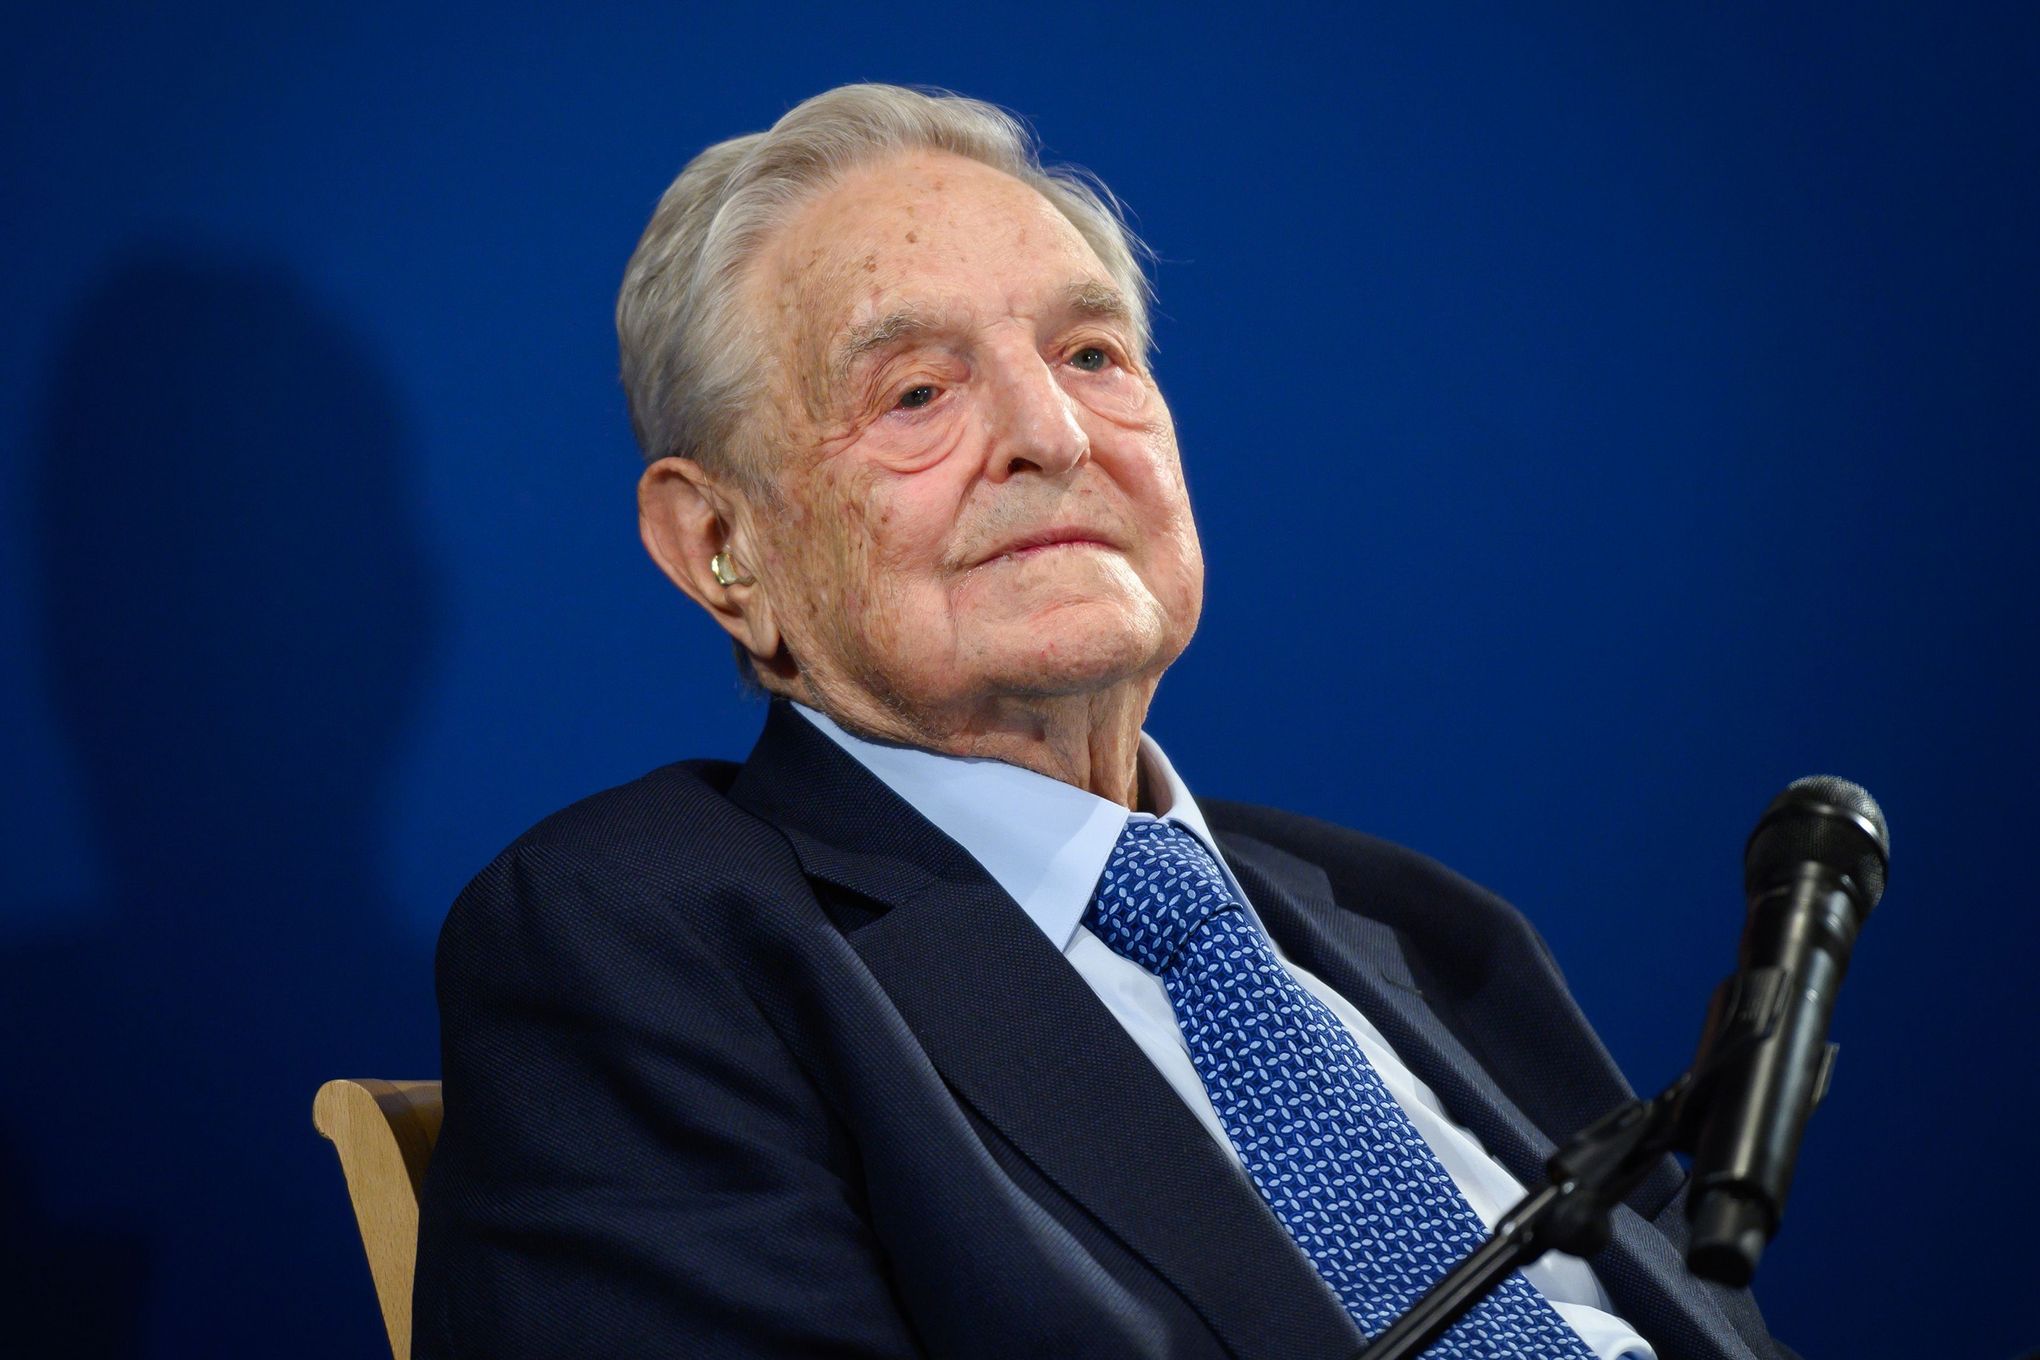 George Soros Hands Control Over His Family's Philanthropy to Son